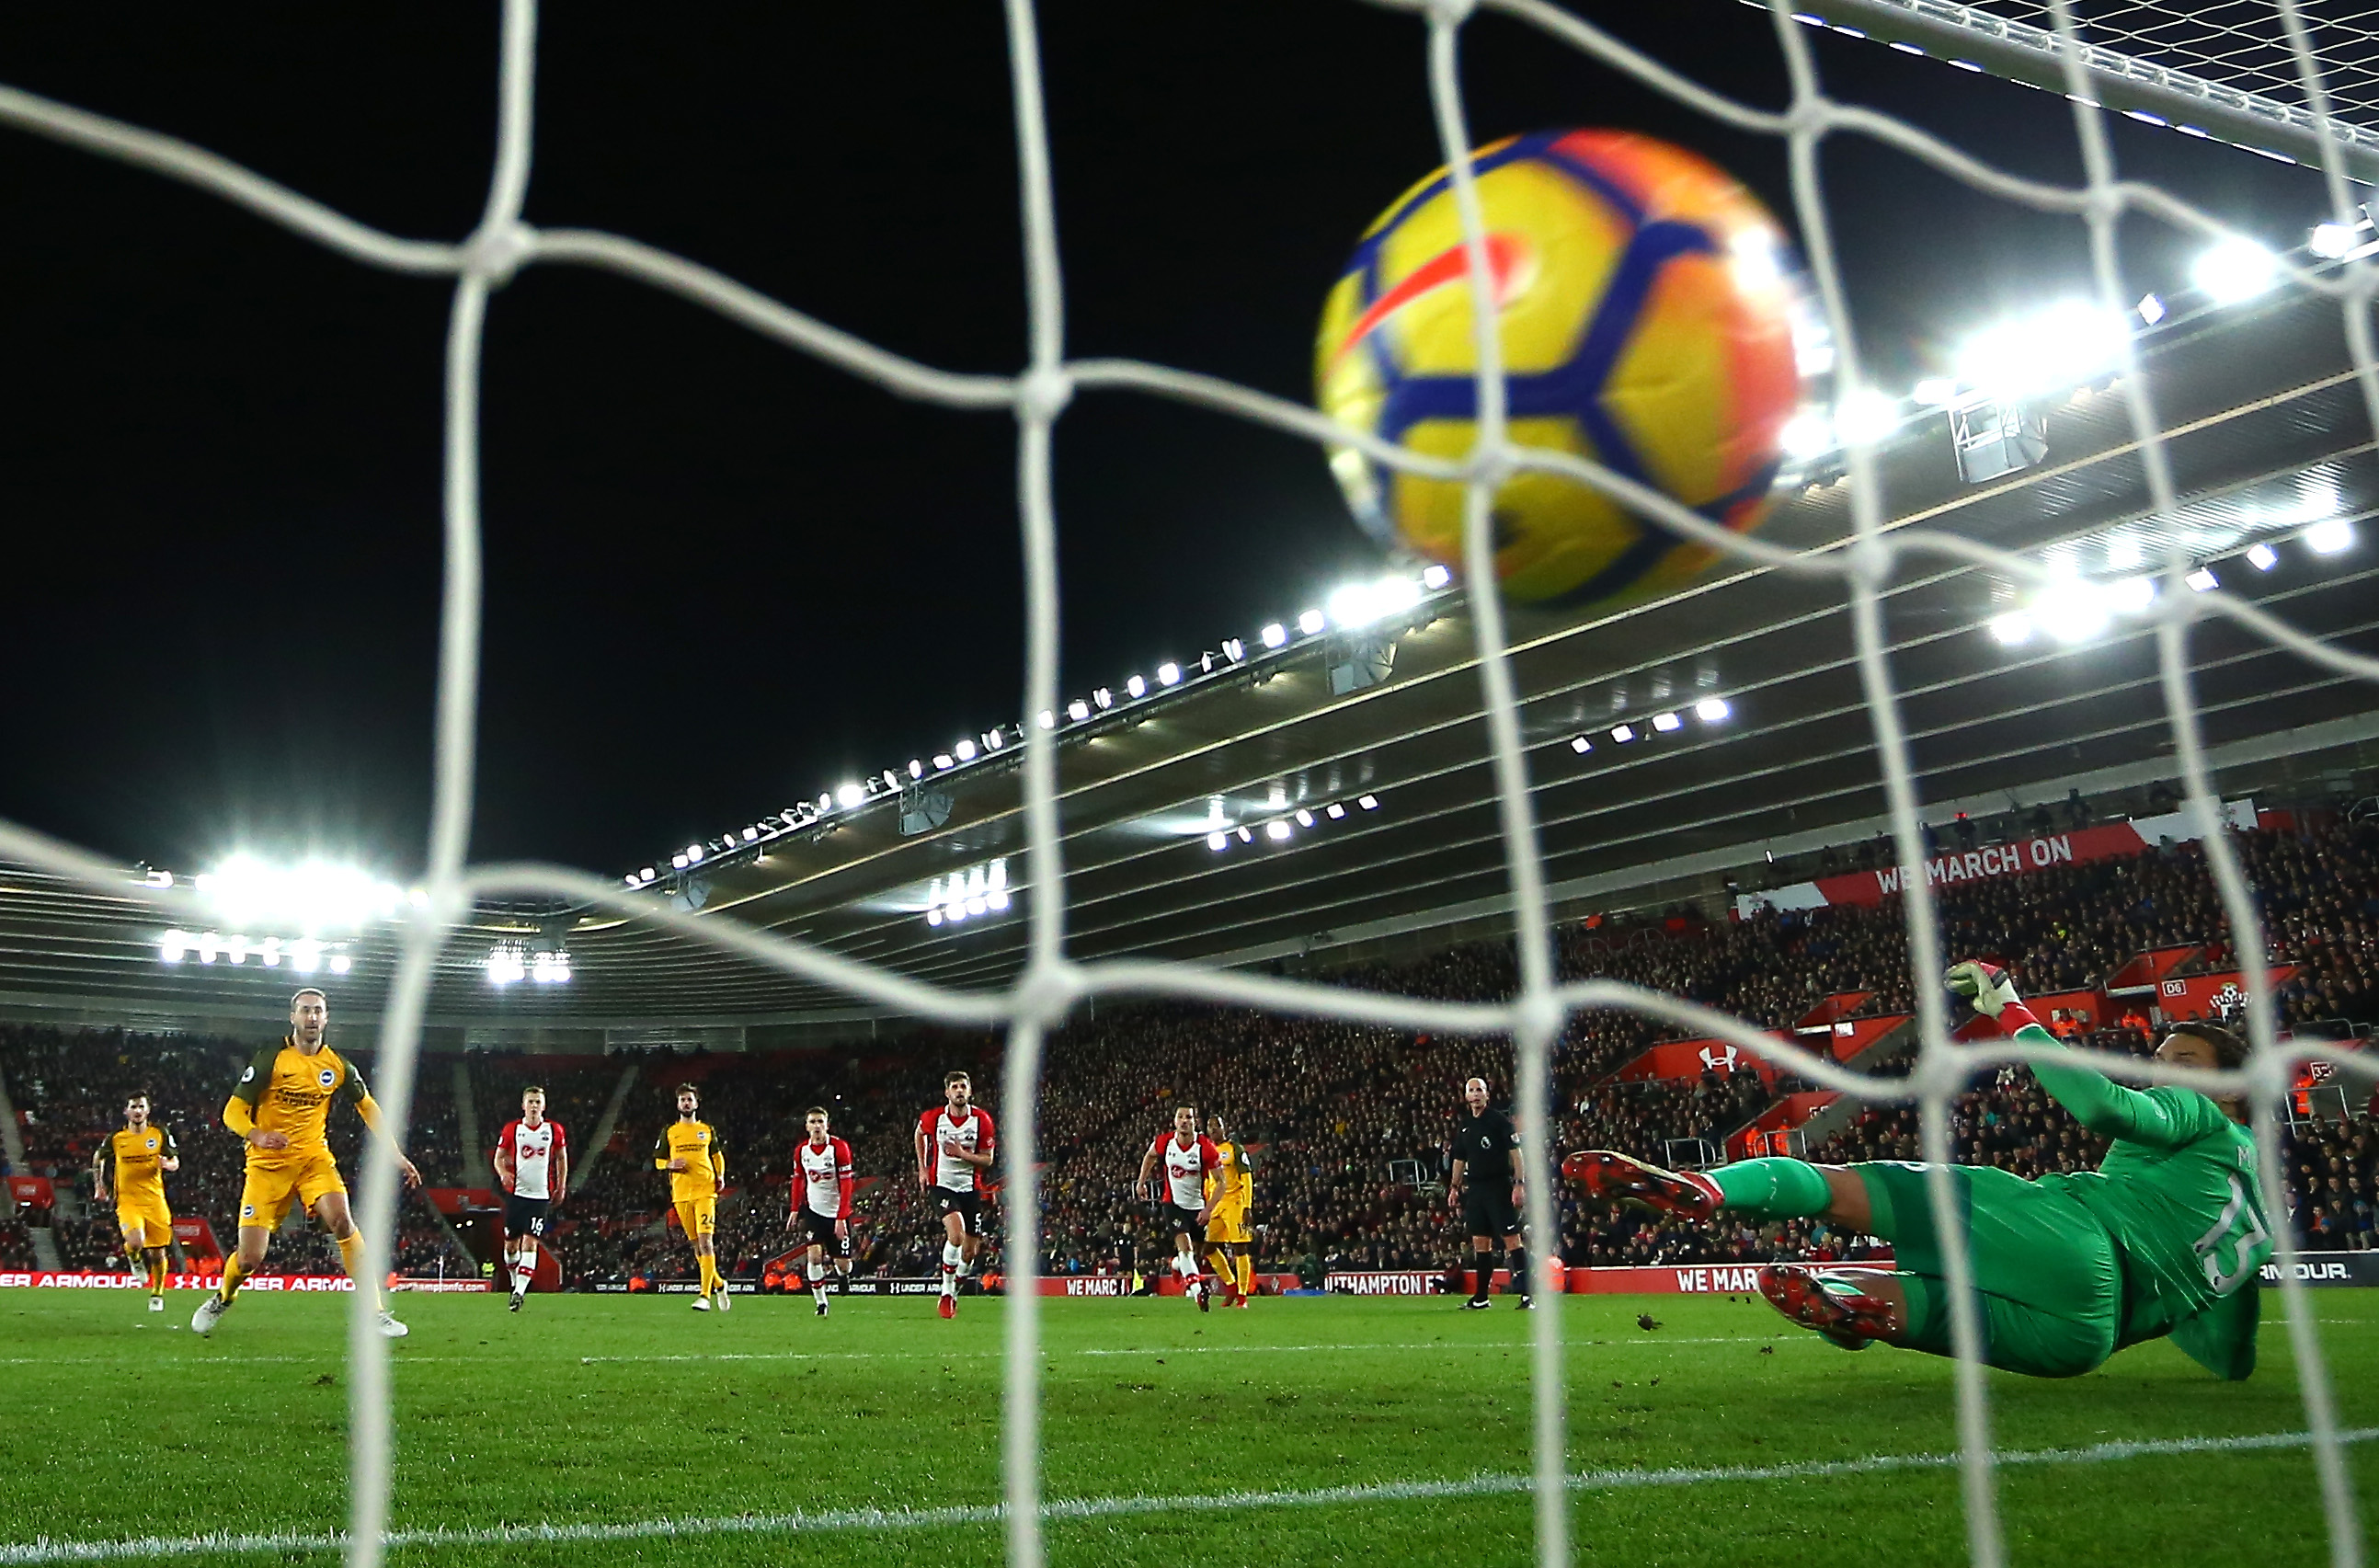 SOUTHAMPTON, ENGLAND - JANUARY 31: Glenn Murray of Brighton and Hove Albion scores his sides first goal from the penalty spot during the Premier League match between Southampton and Brighton and Hove Albion at St Mary's Stadium on January 31, 2018 in Southampton, England.  (Photo by Jordan Mansfield/Getty Images)